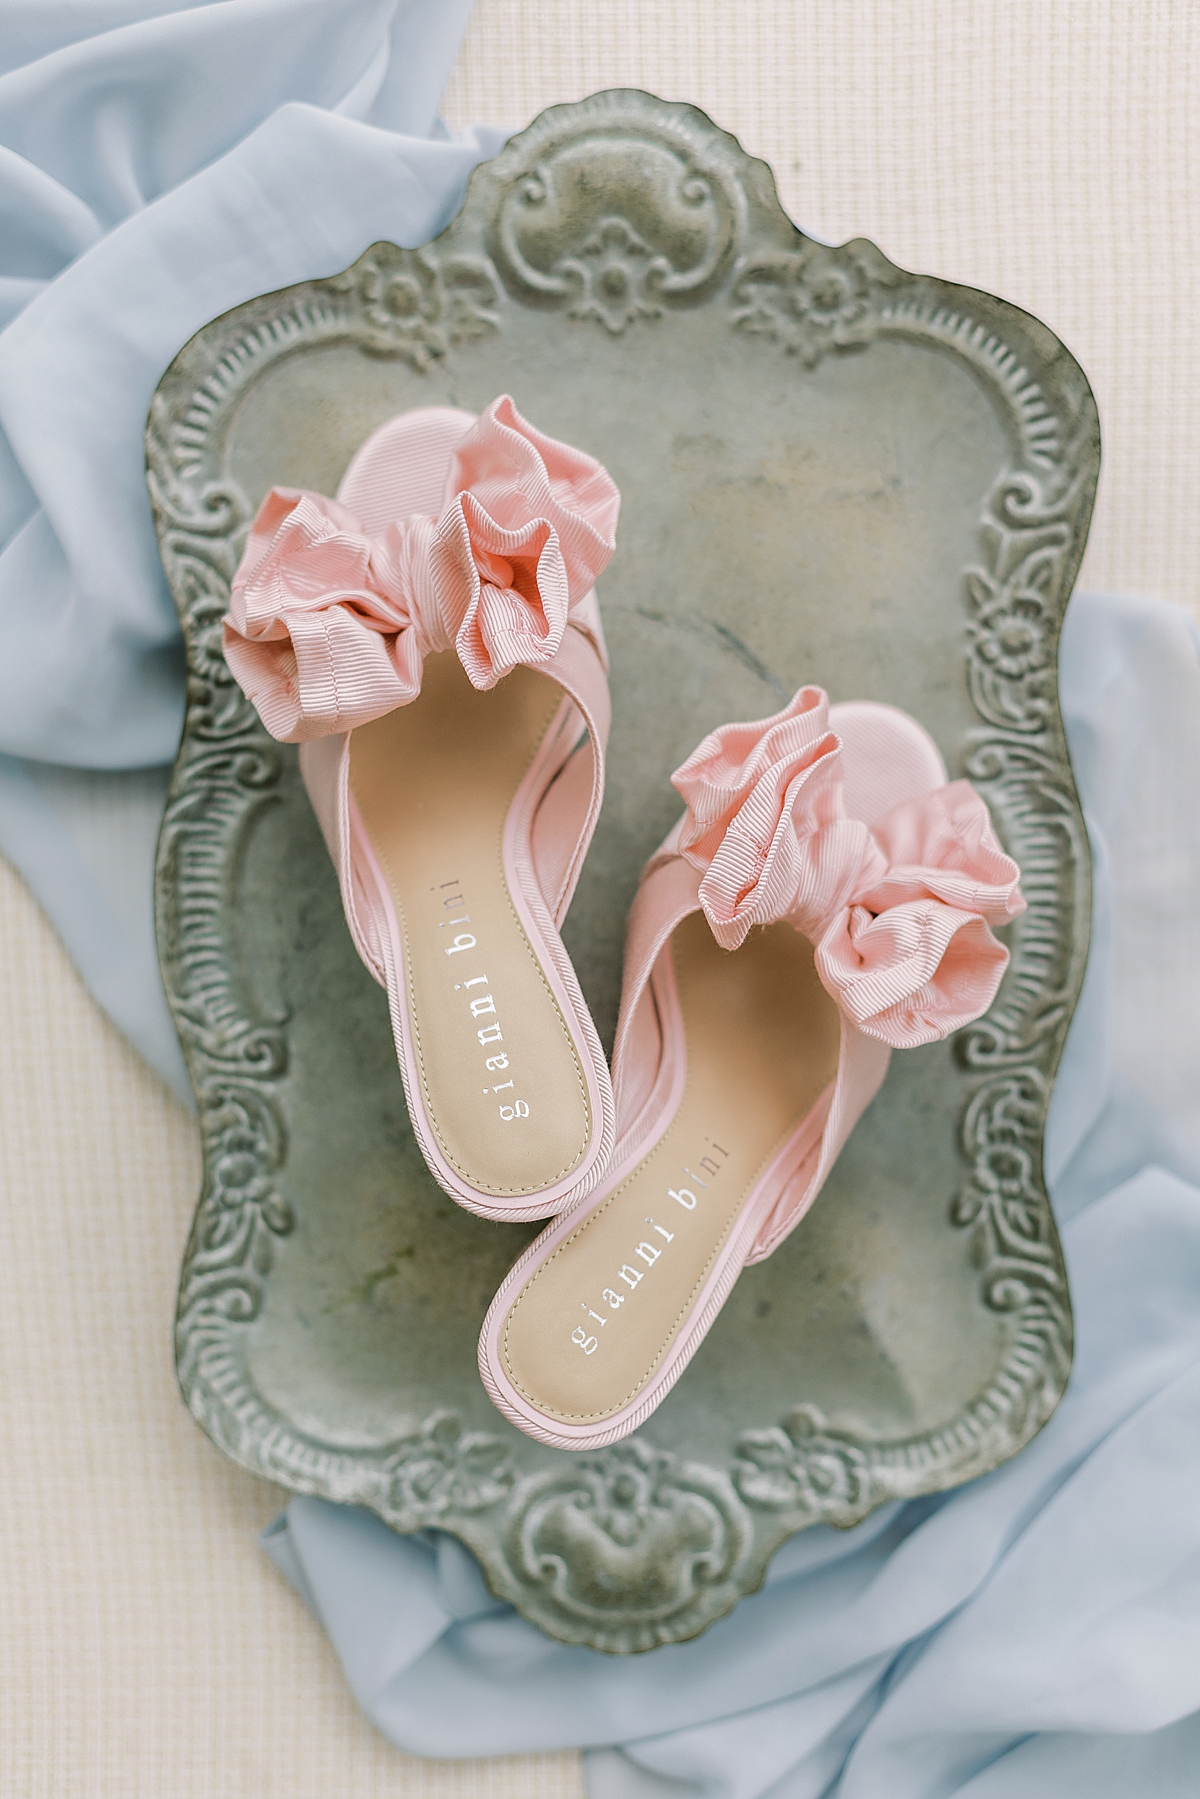 The bride's pink heels on a platter.